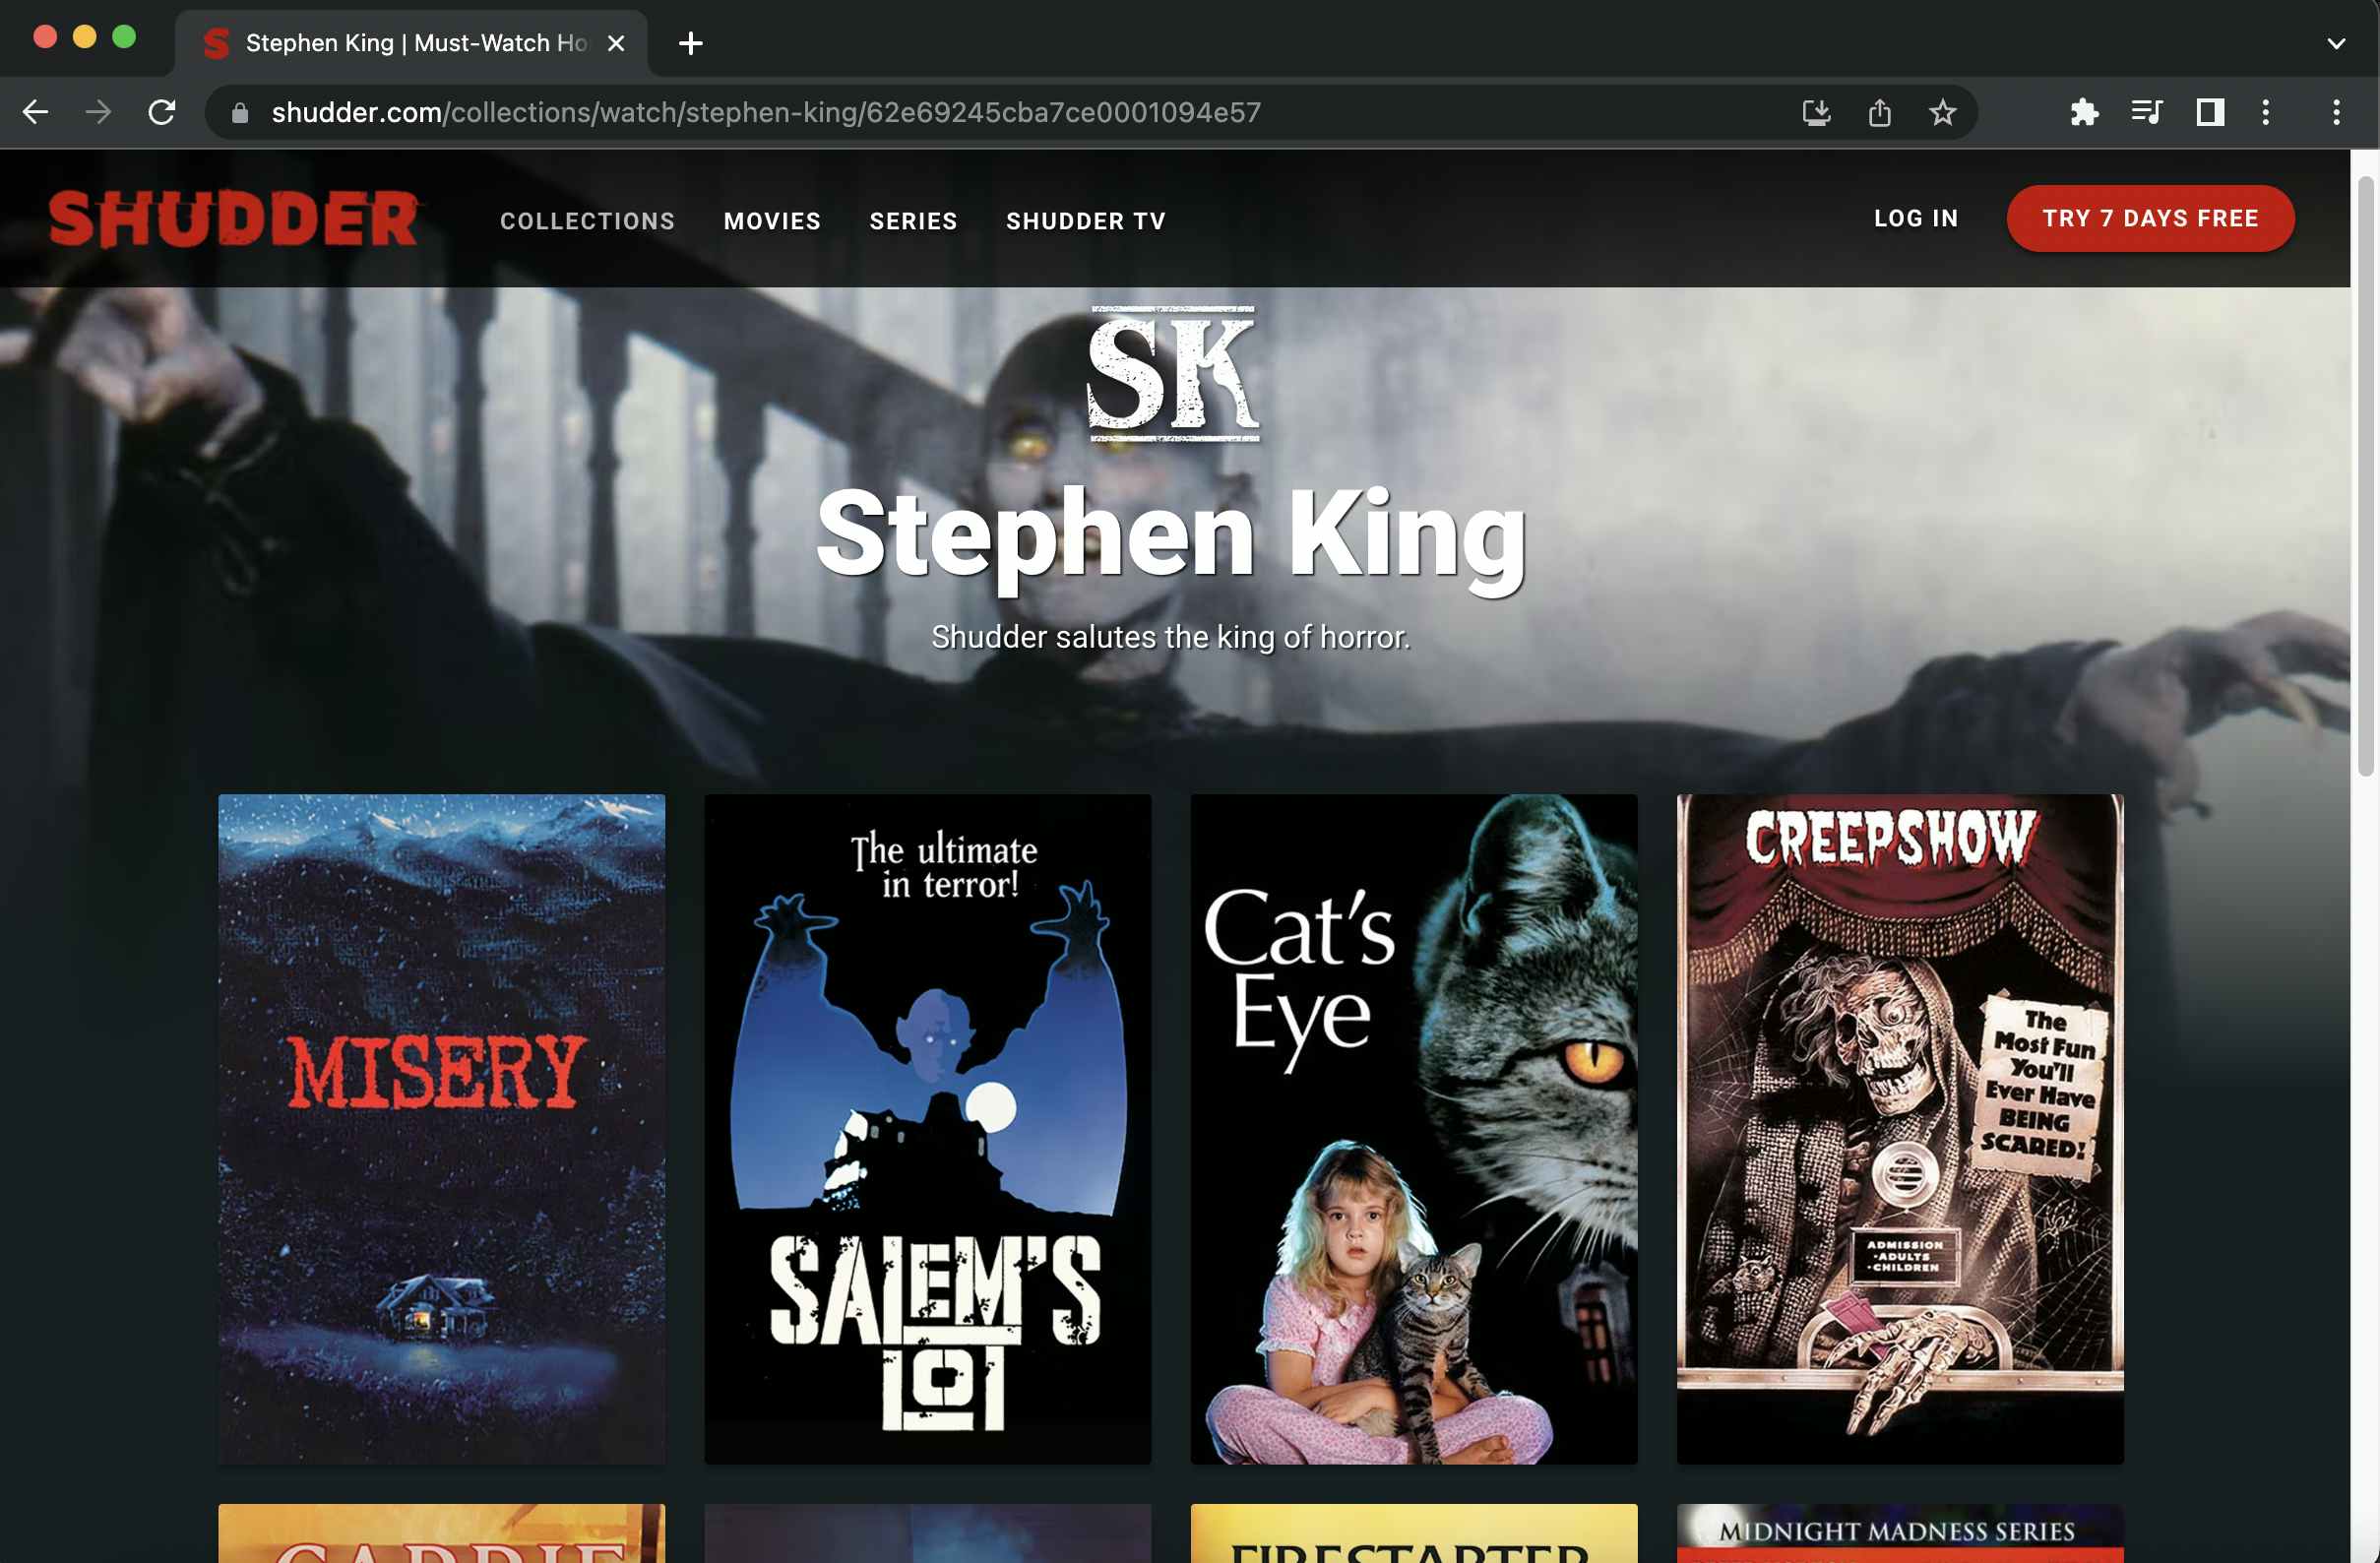 A screenshot of the Stephen King free Halloween movies collection on the Shudder website.